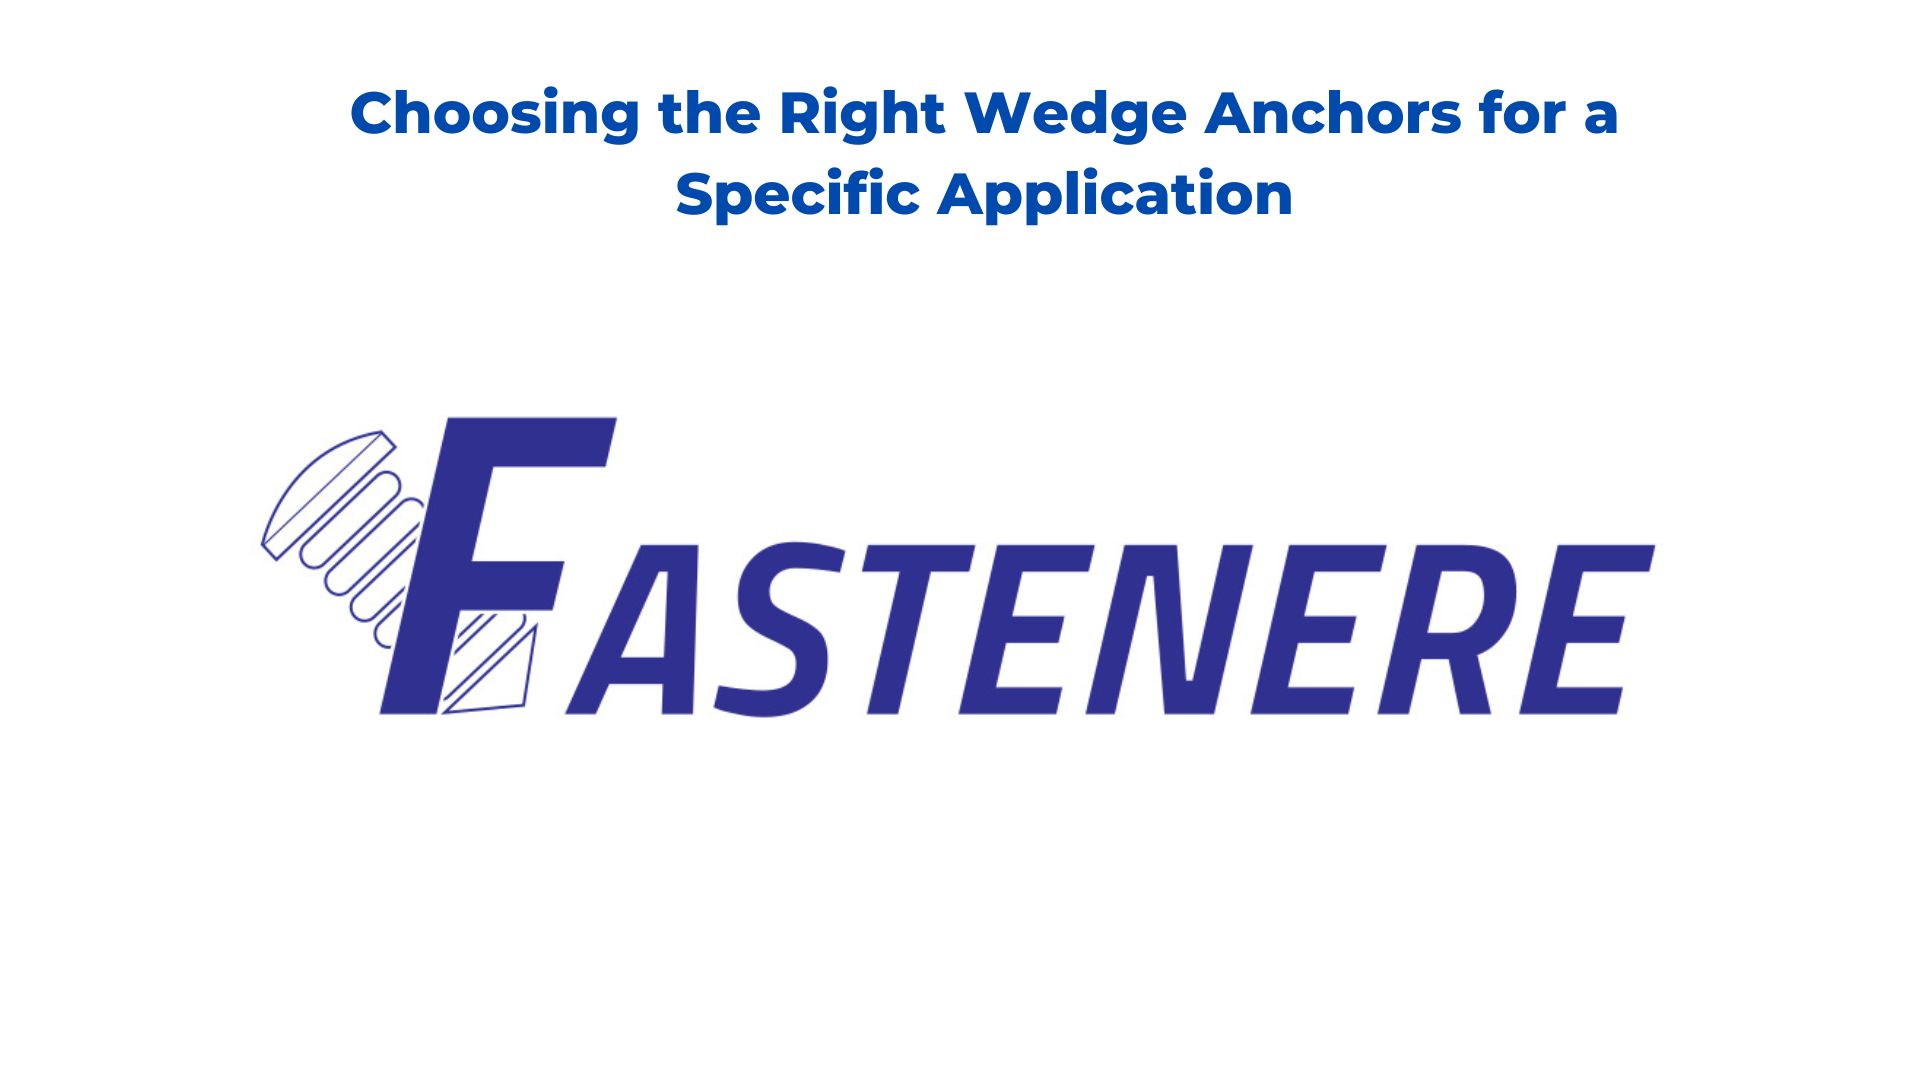 Choosing the Right Wedge Anchors for a Specific Application